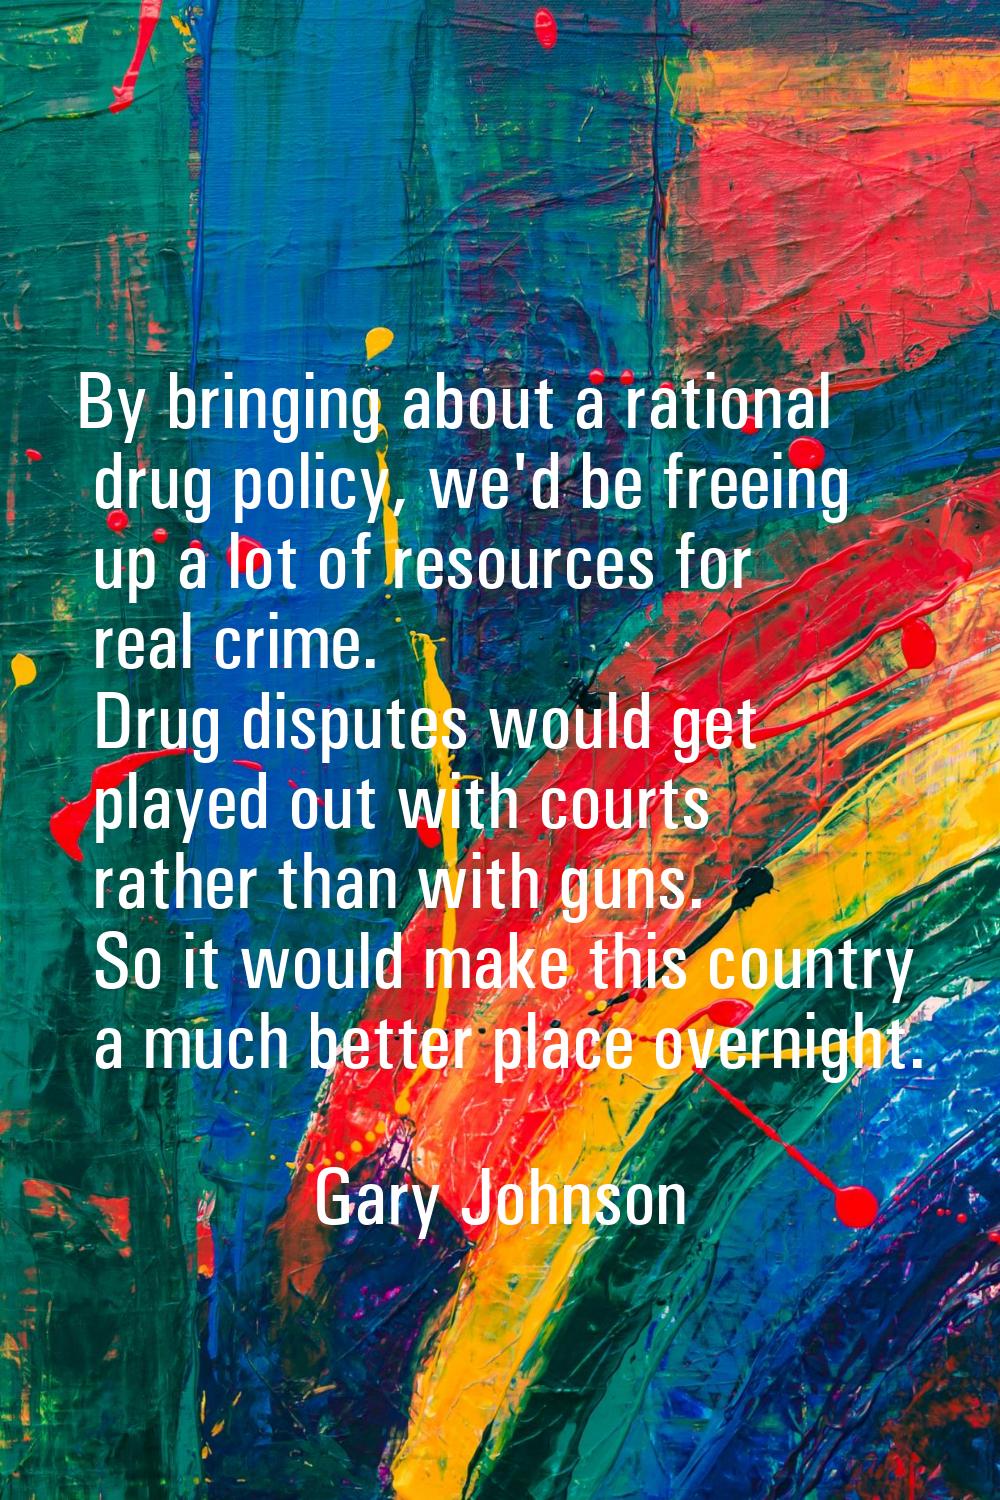 By bringing about a rational drug policy, we'd be freeing up a lot of resources for real crime. Dru